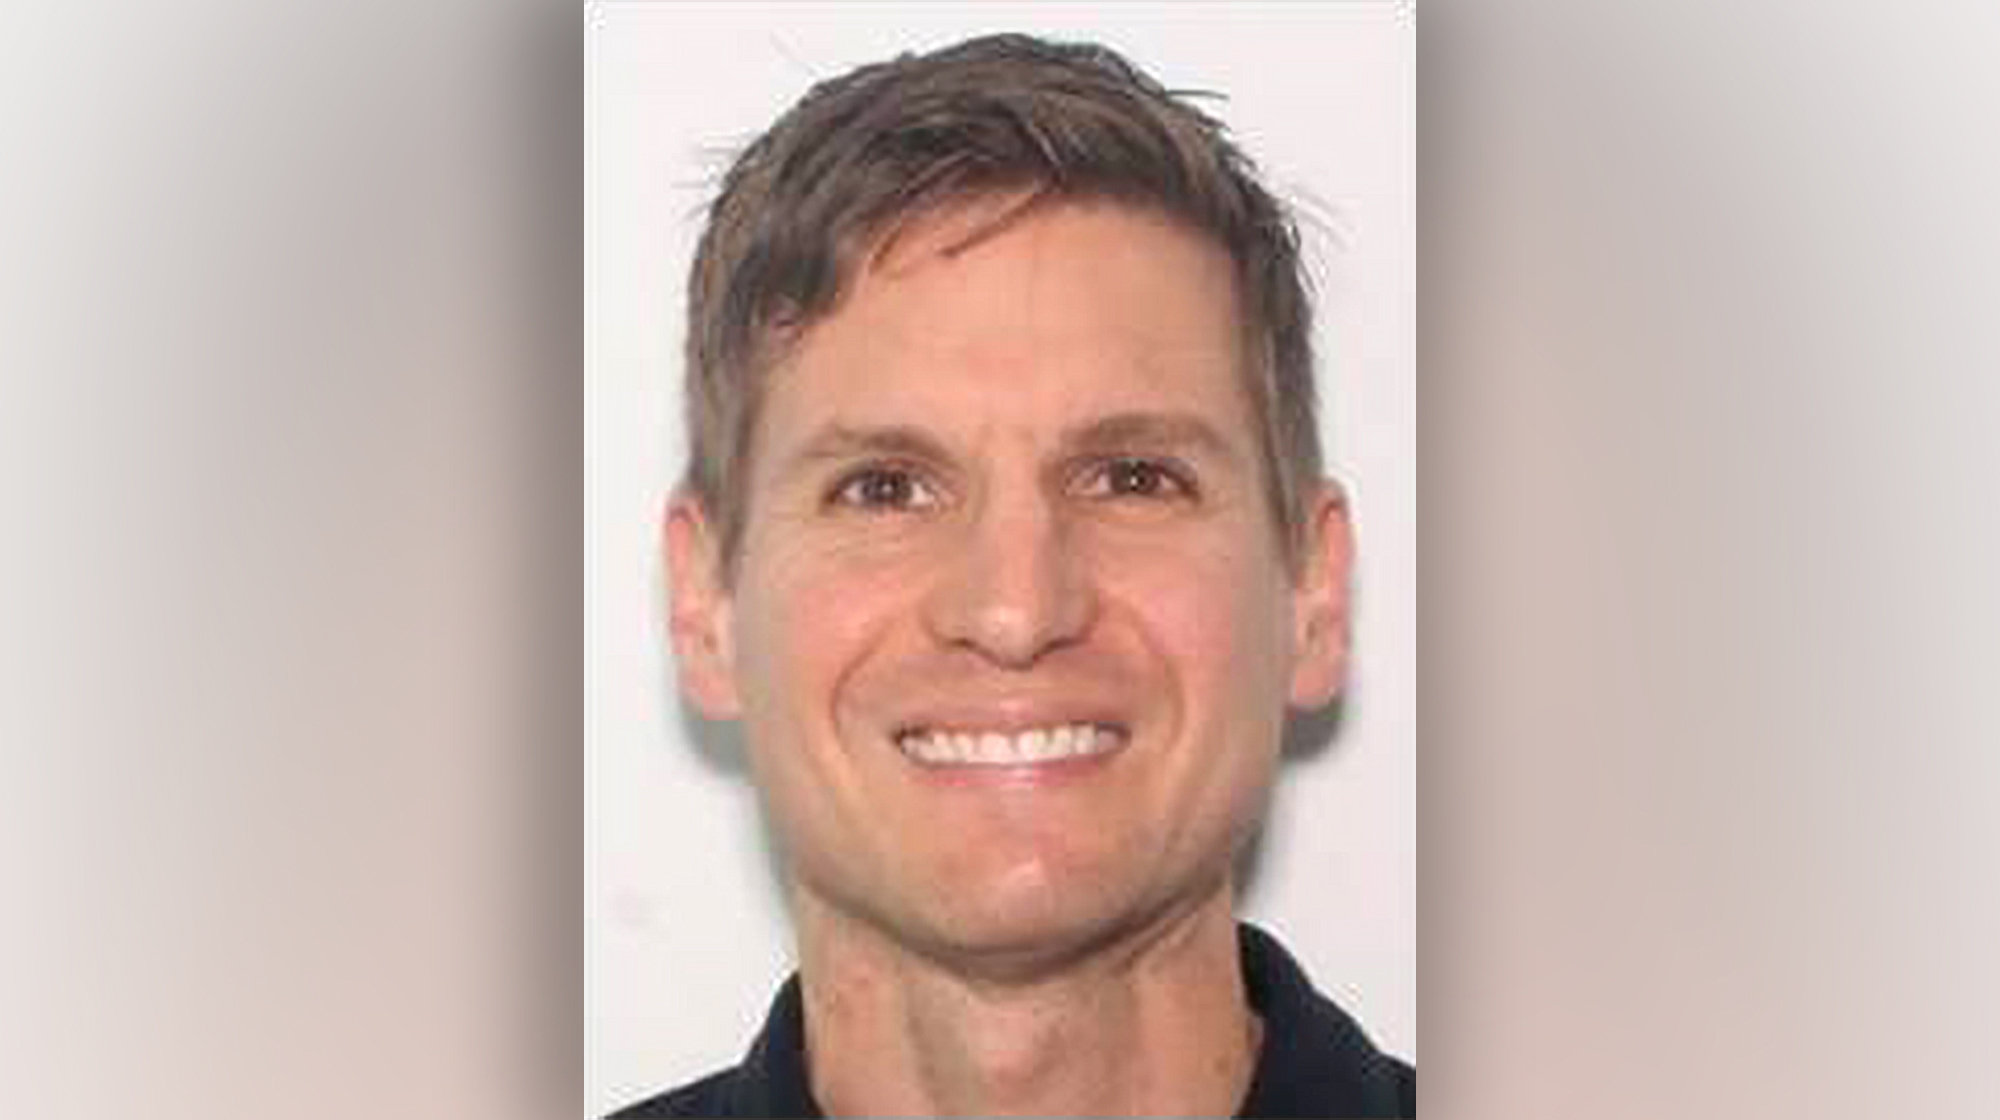 Coast Guard Suspends Search For Man Who Disappeared Swimming At Popular Florida Beach